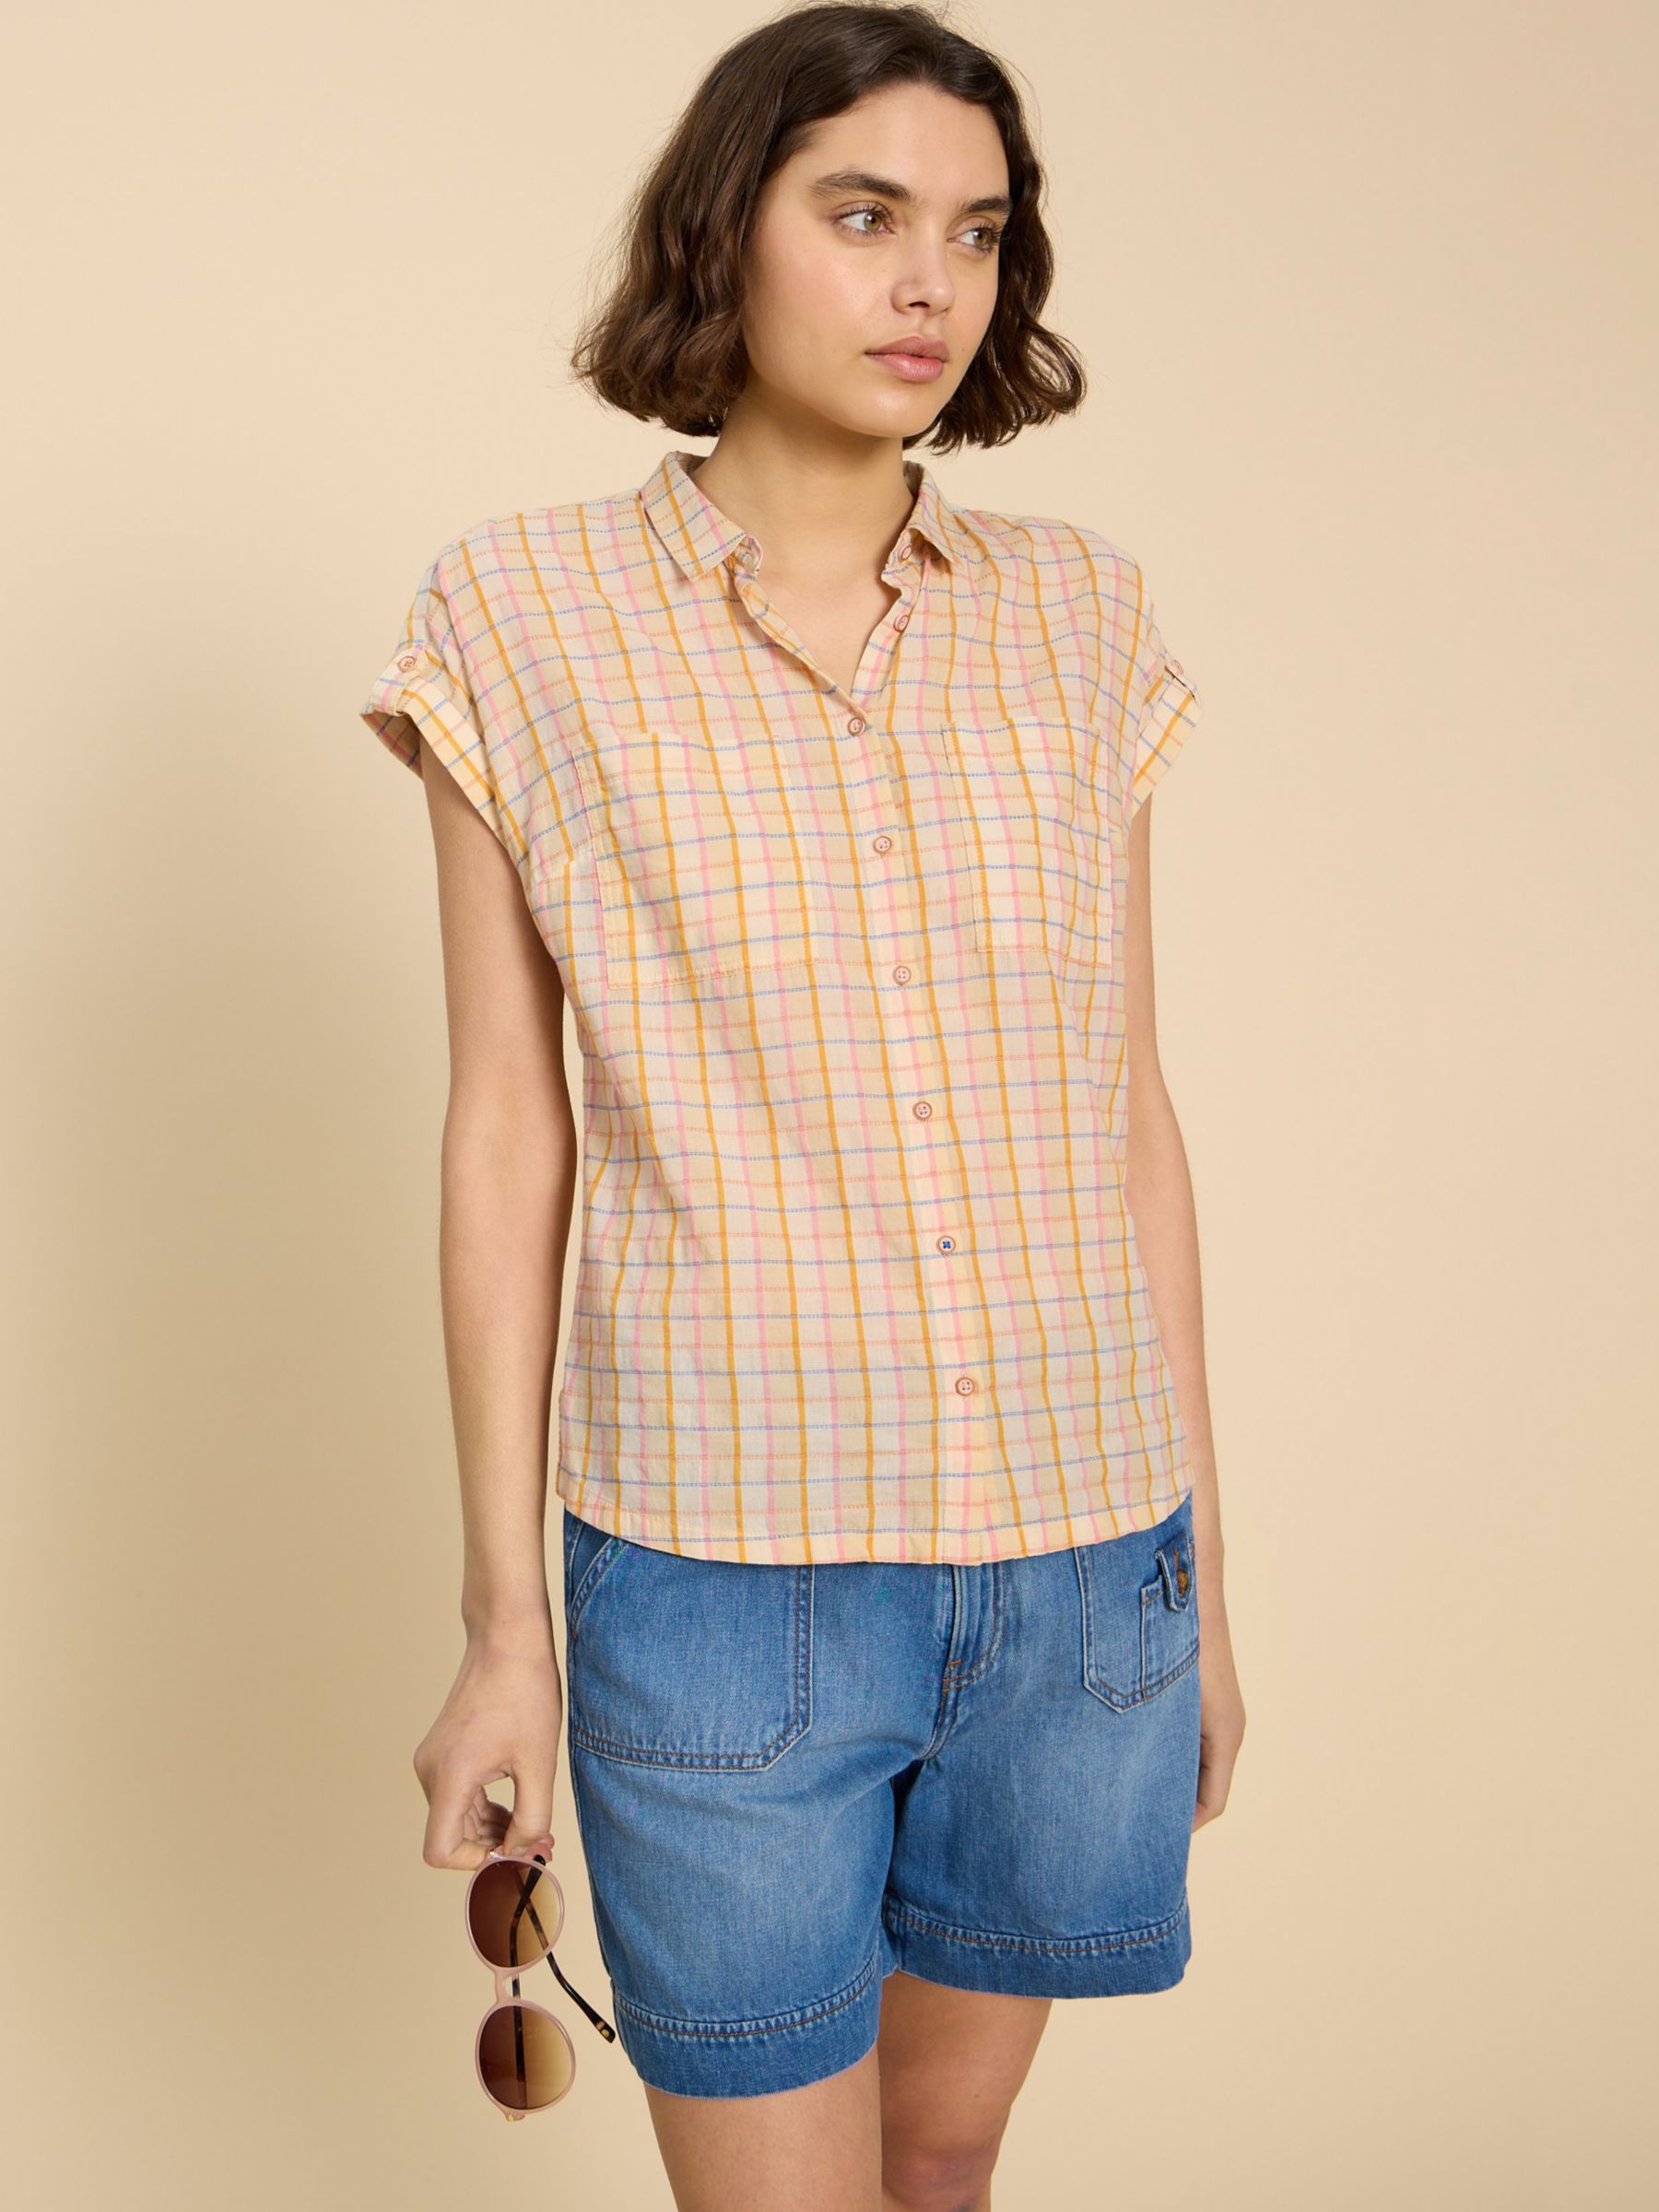 Women's Checked Shirts & Tops